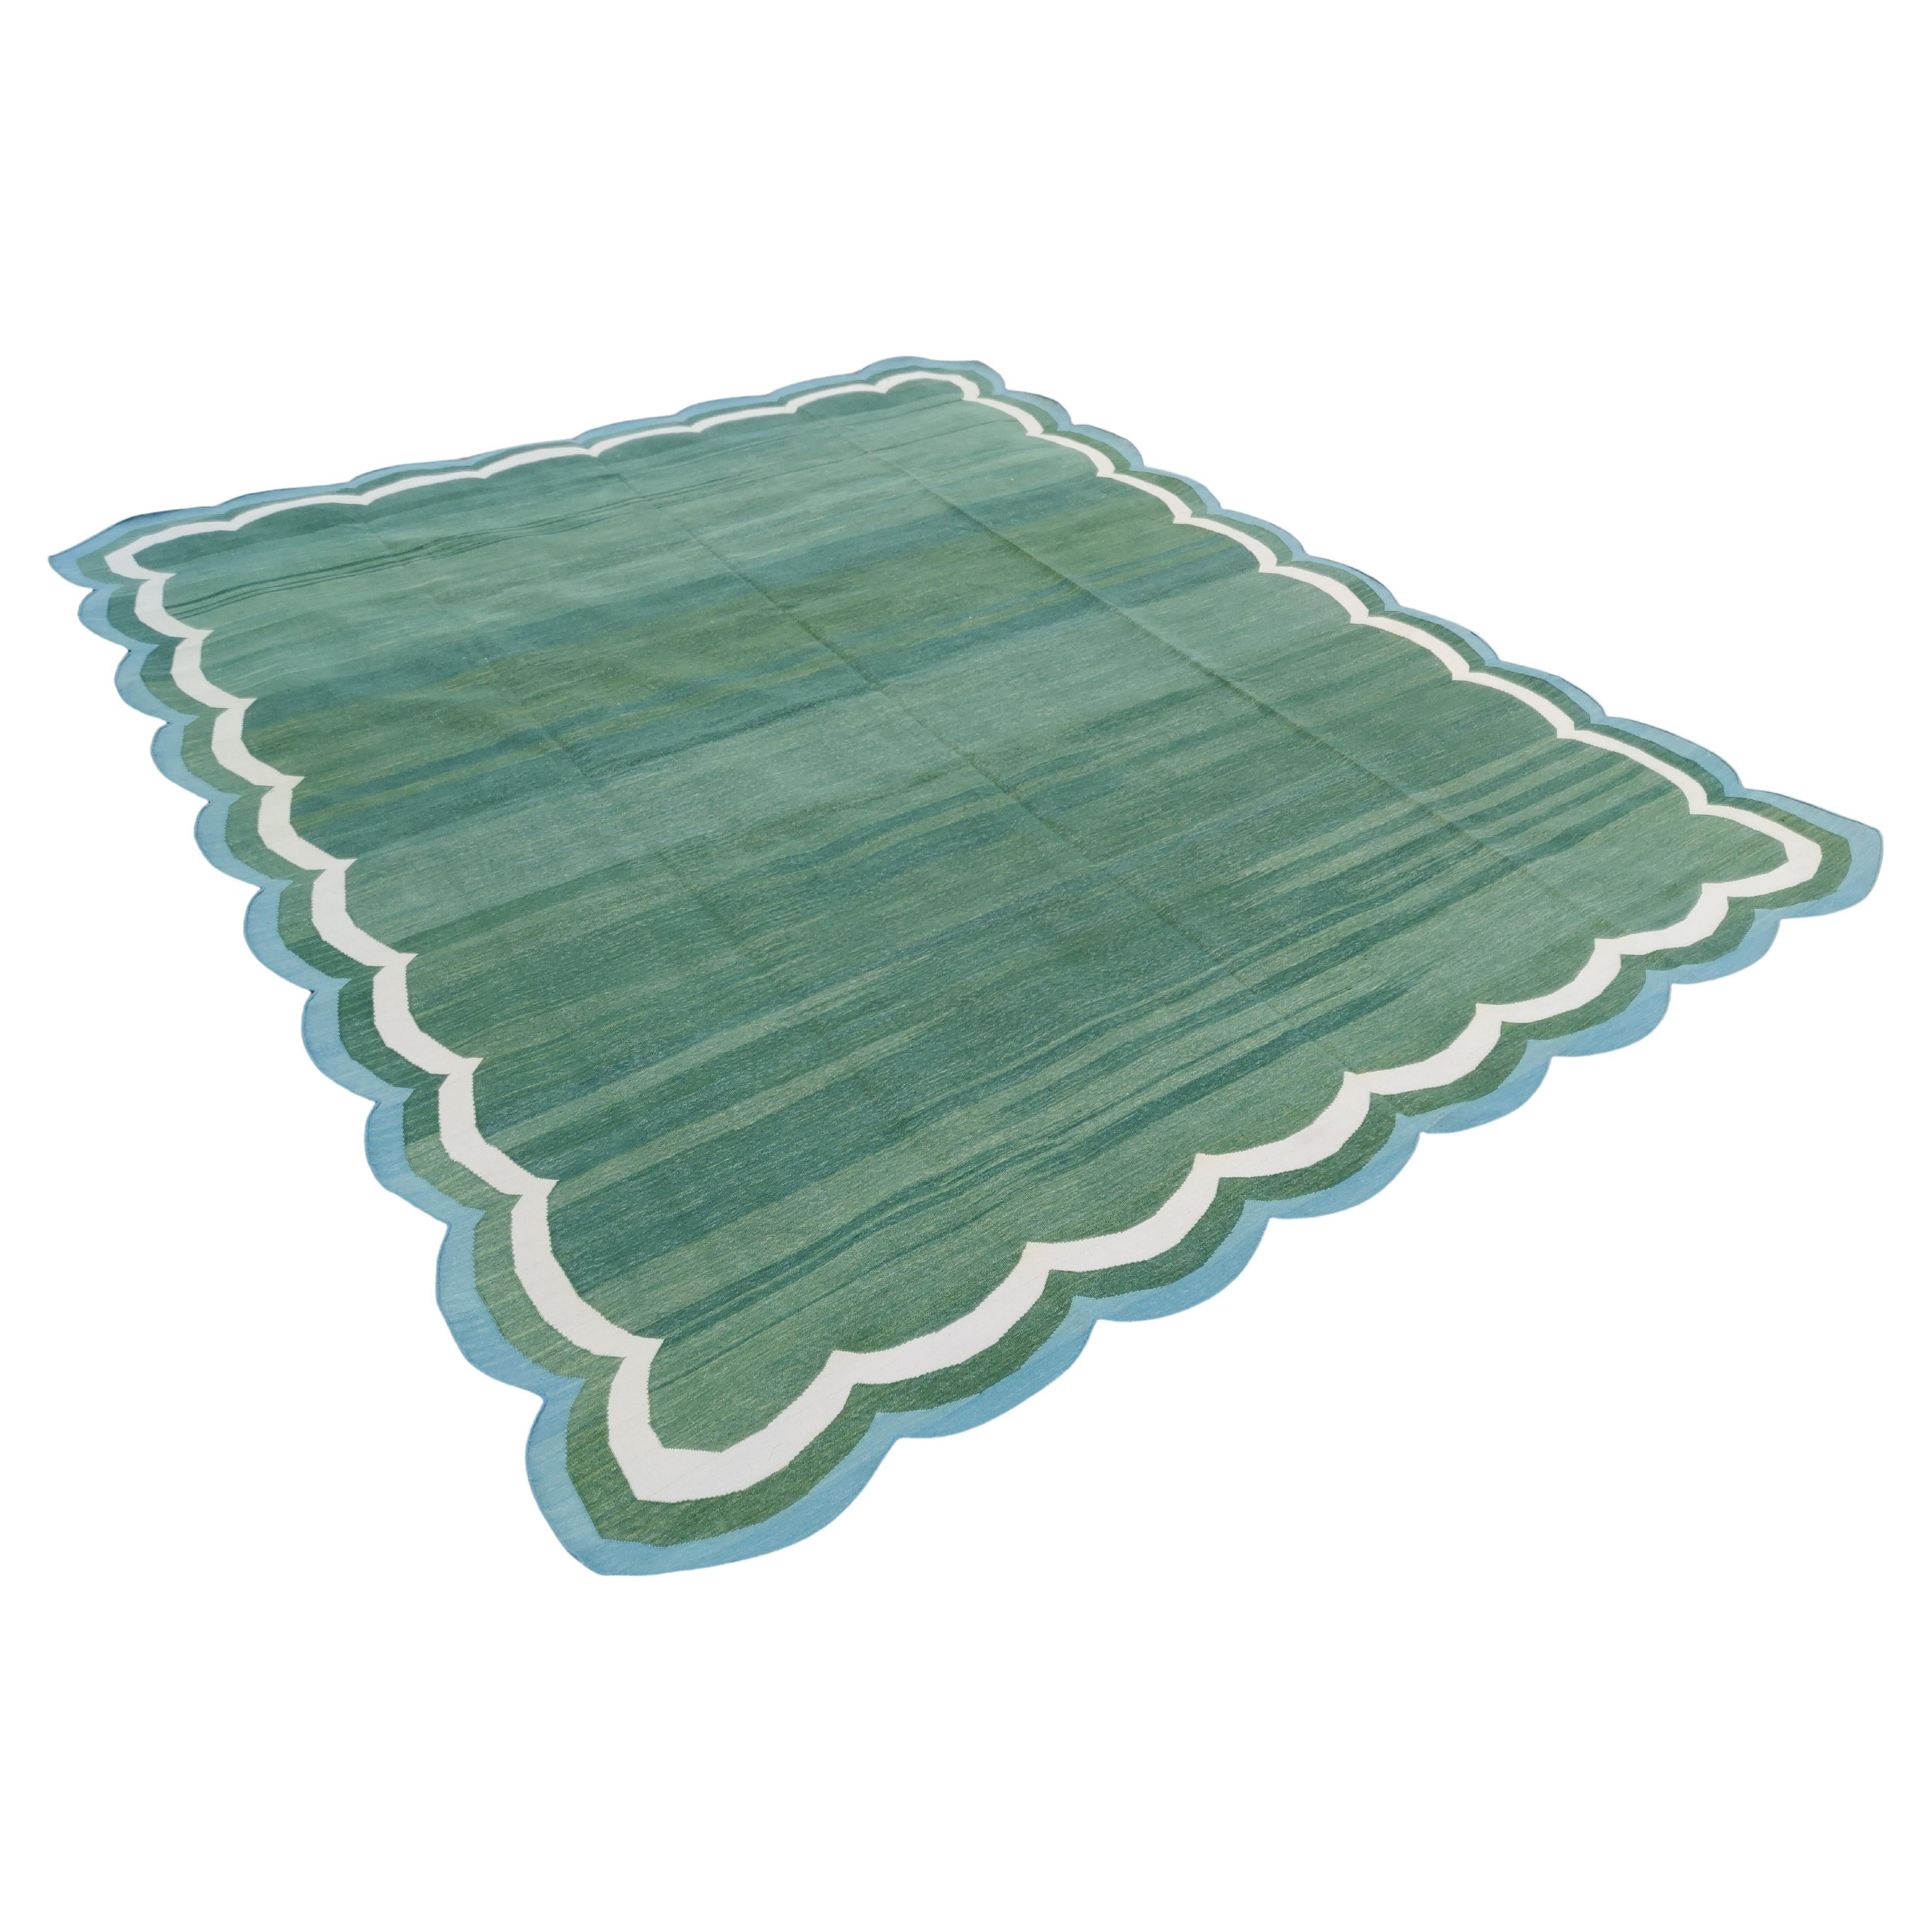 Handmade Cotton Area Flat Weave Rug, Green & Blue Scalloped Indian Dhurrie Rug For Sale